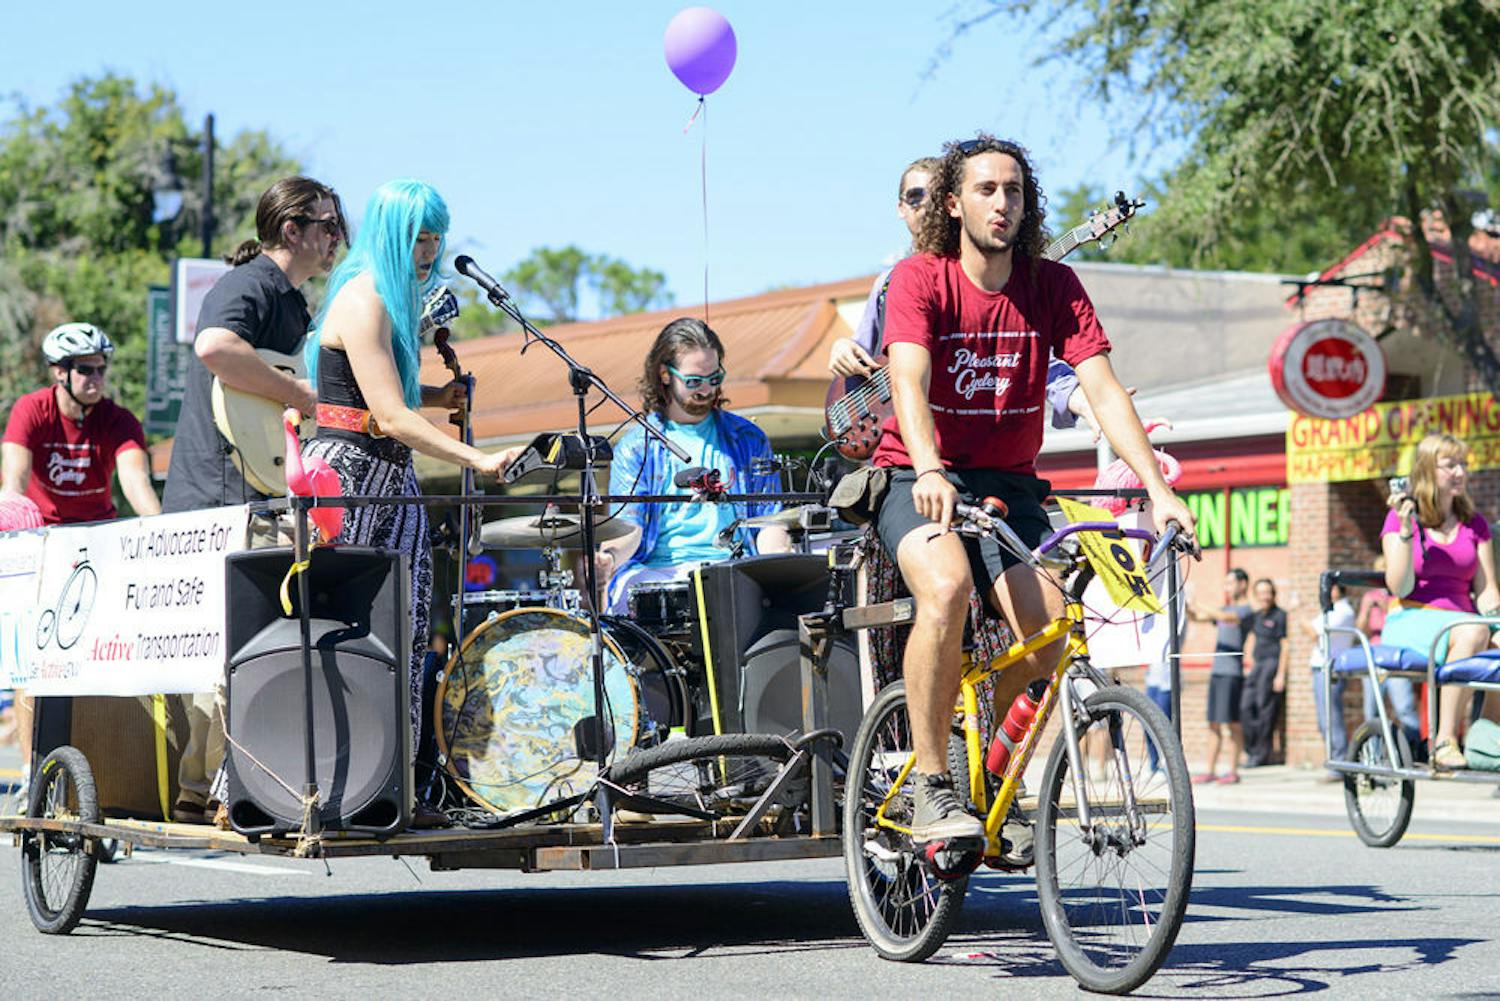 Sergei Max Hubscher Cook of Pleasant Cyclery pulls the local cosmic-funk pop band Flat Land in the UF Homecoming Parade while promoting Get Active GNV, which advocates for fun and safe active transportation.&nbsp;